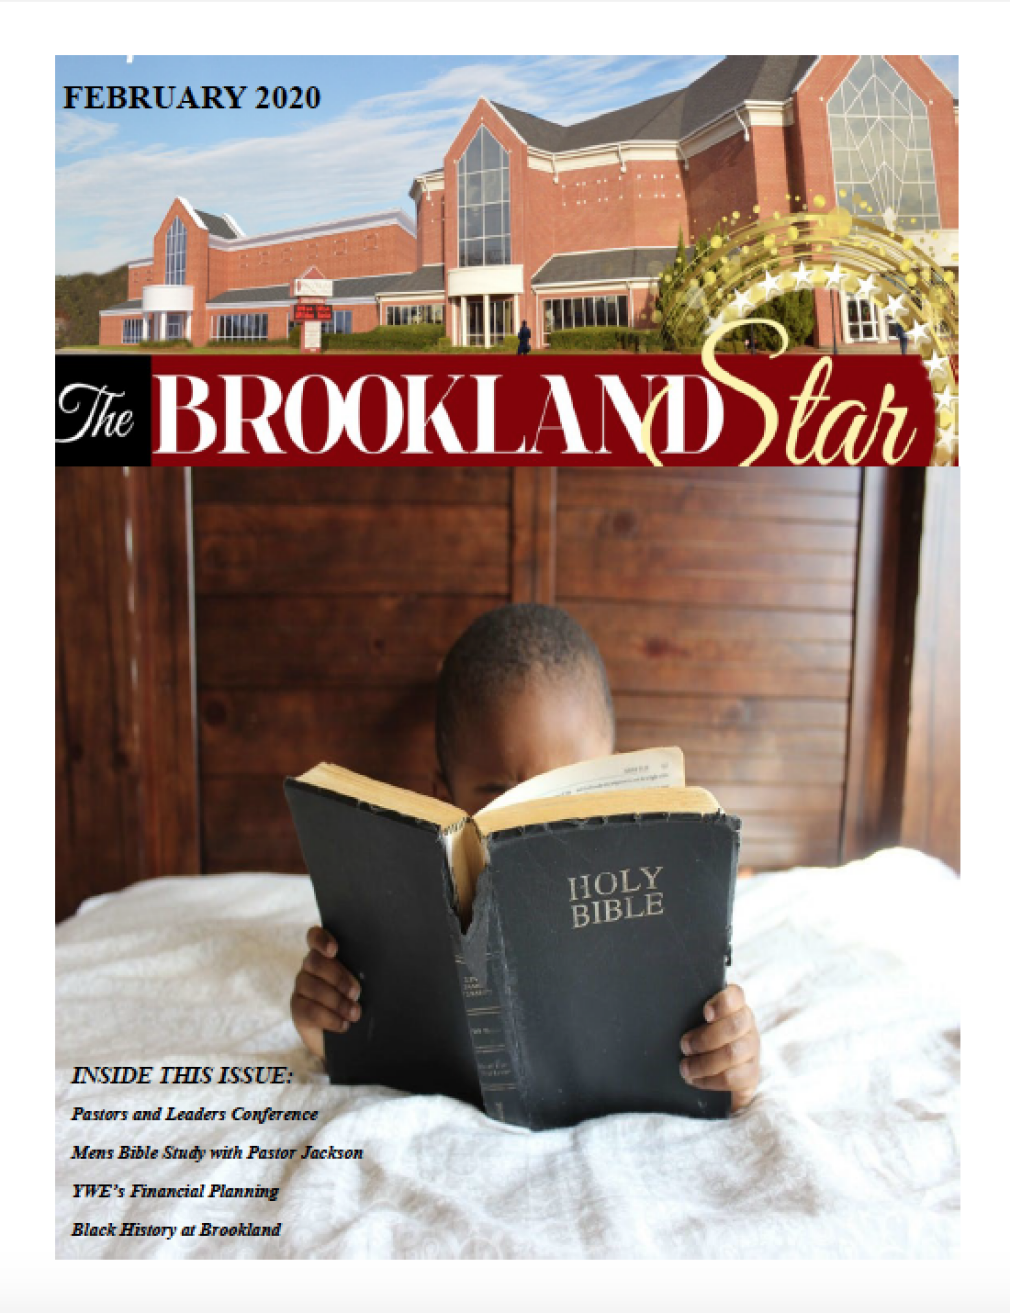 The Brookland Star February 2020 Edition